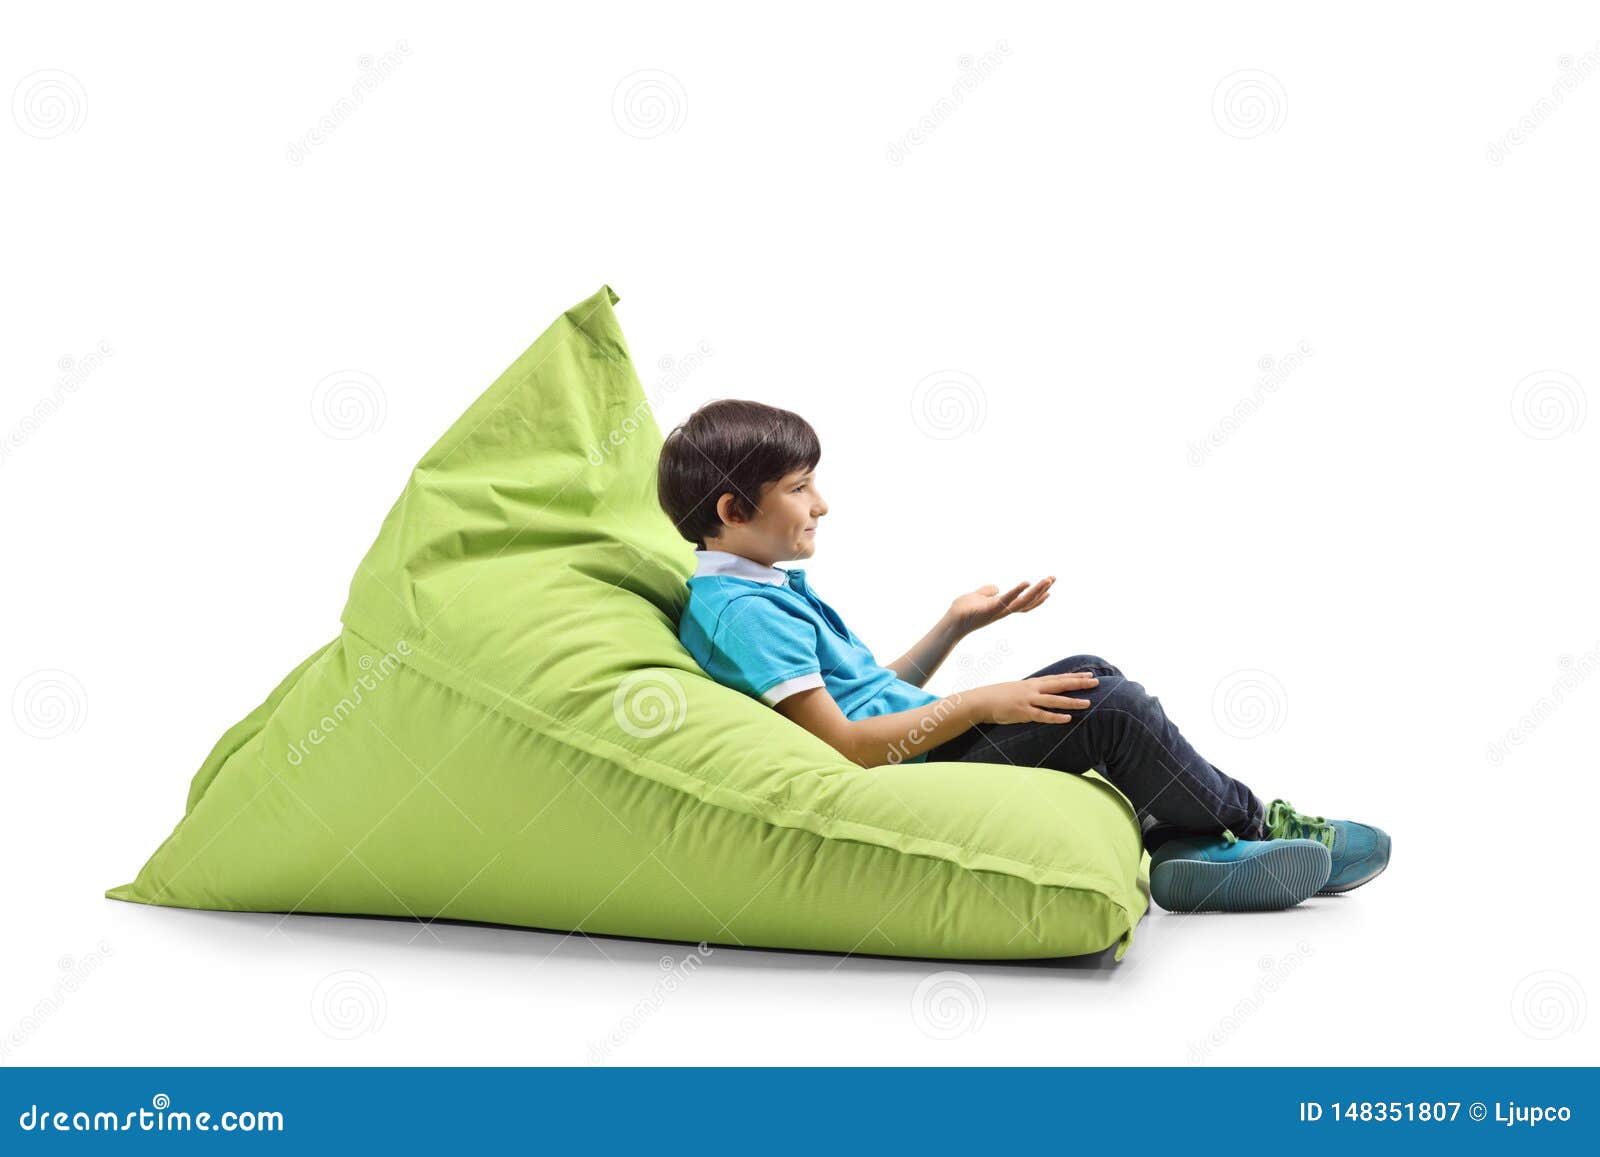 Boy Sitting on a Green Bean Bag and Gesturing with Hand Stock Image ...